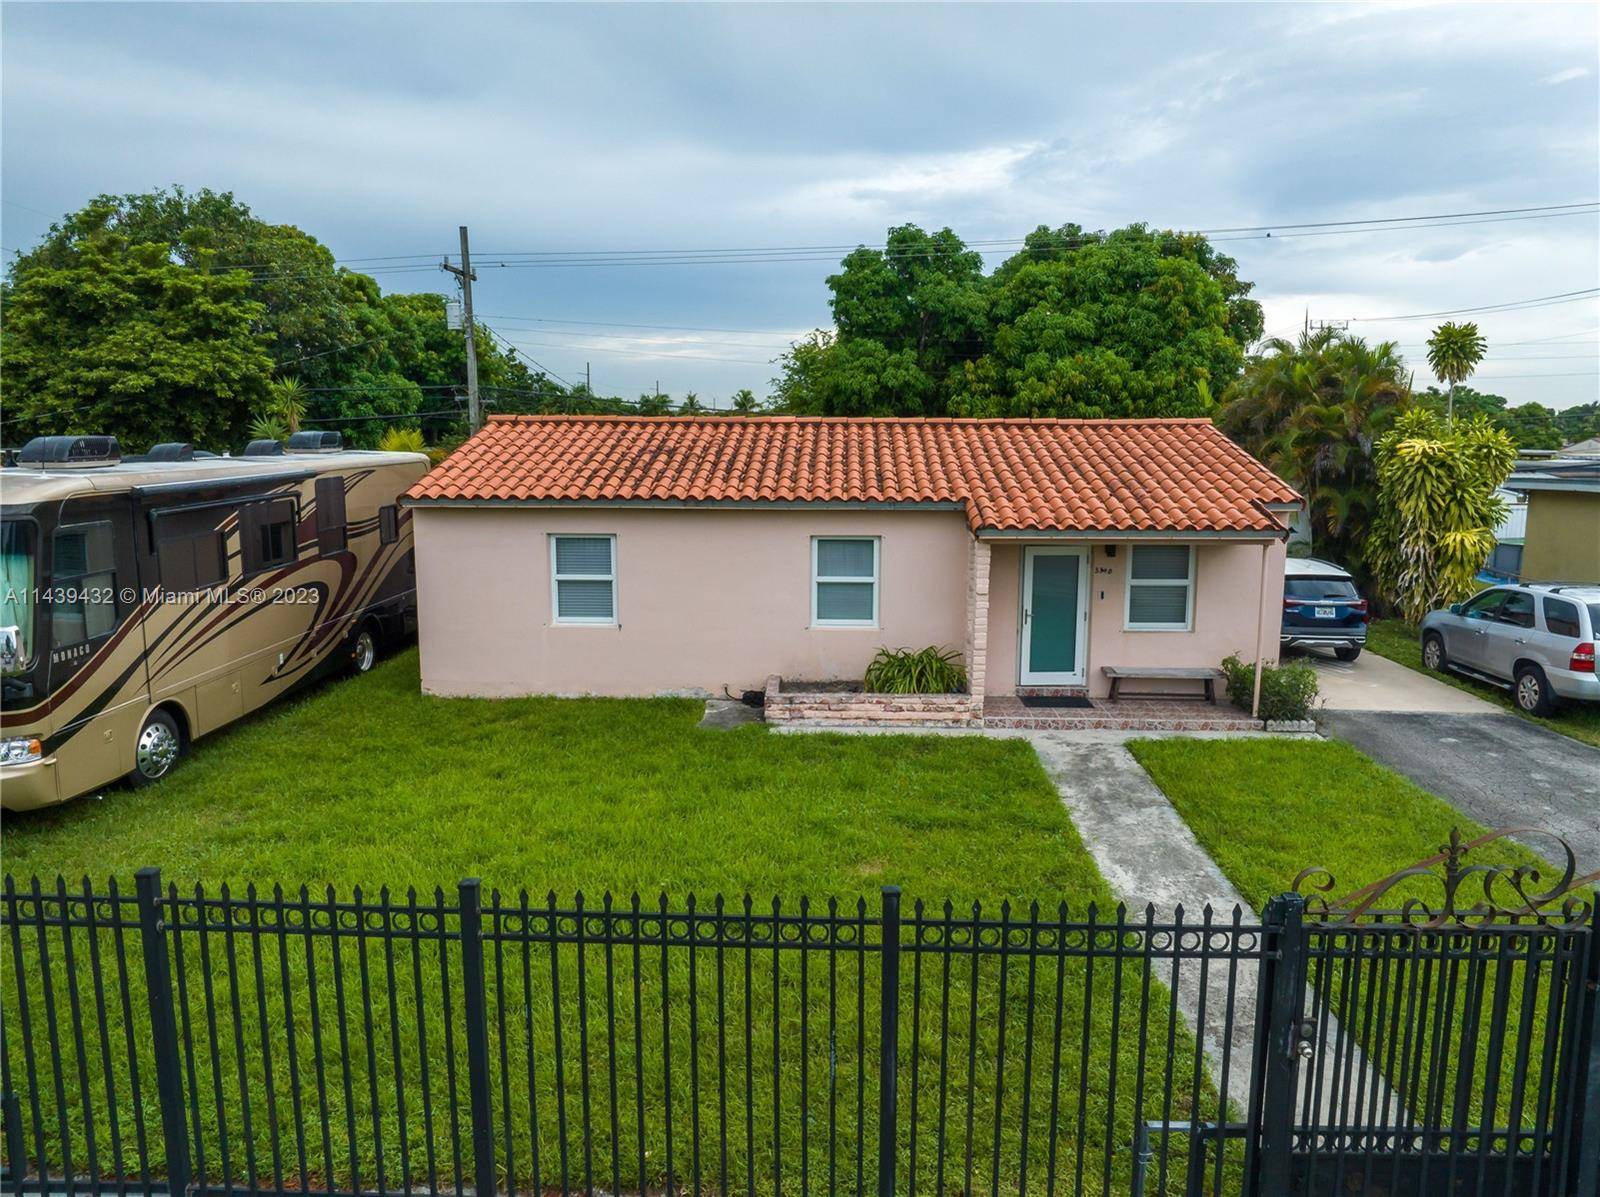 Located in the heart of the City of Hialeah this lovely partially renovated starter home features.